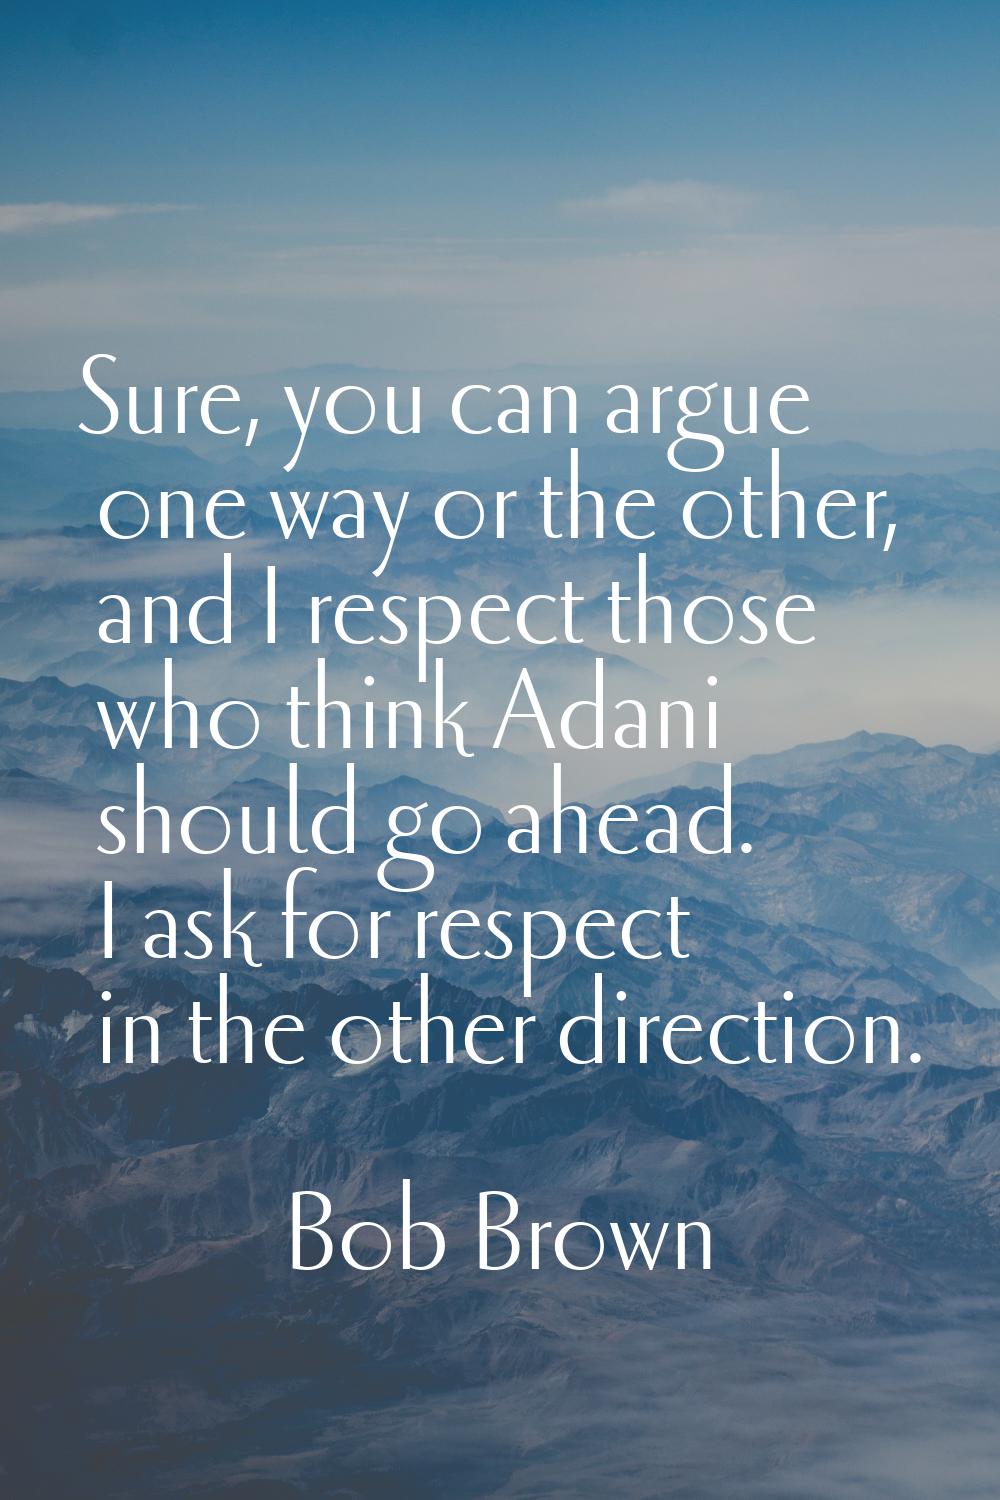 Sure, you can argue one way or the other, and I respect those who think Adani should go ahead. I as